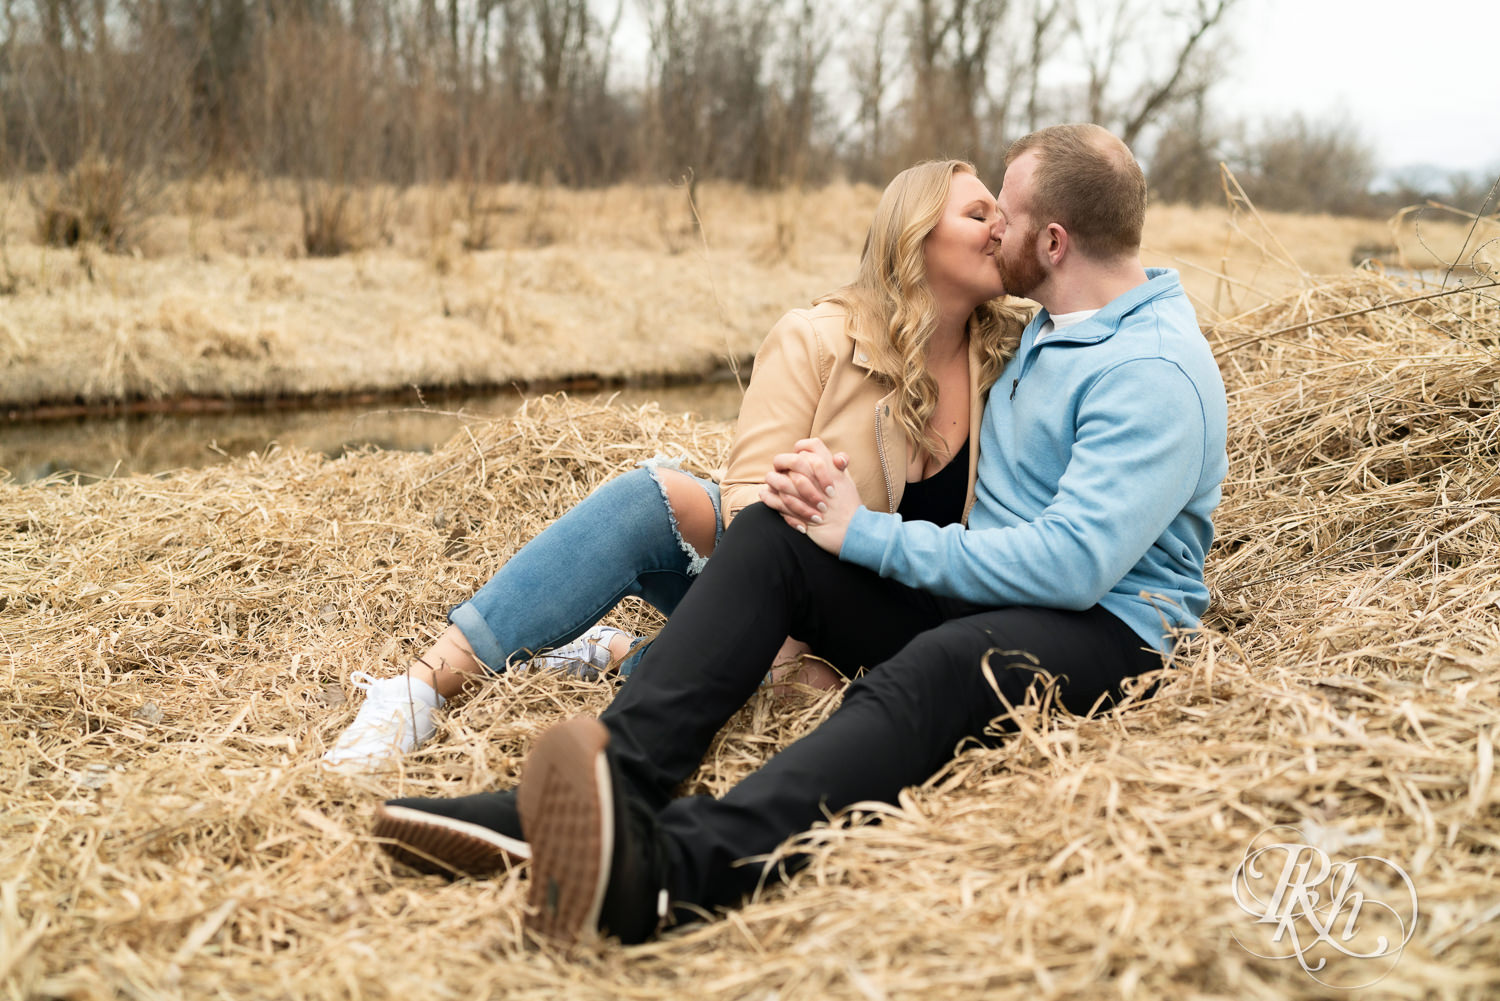 Man in blue shirt and woman in jeans kiss during engagement photography at Rice Creek Regional Trail in Shoreview, Minnesota.